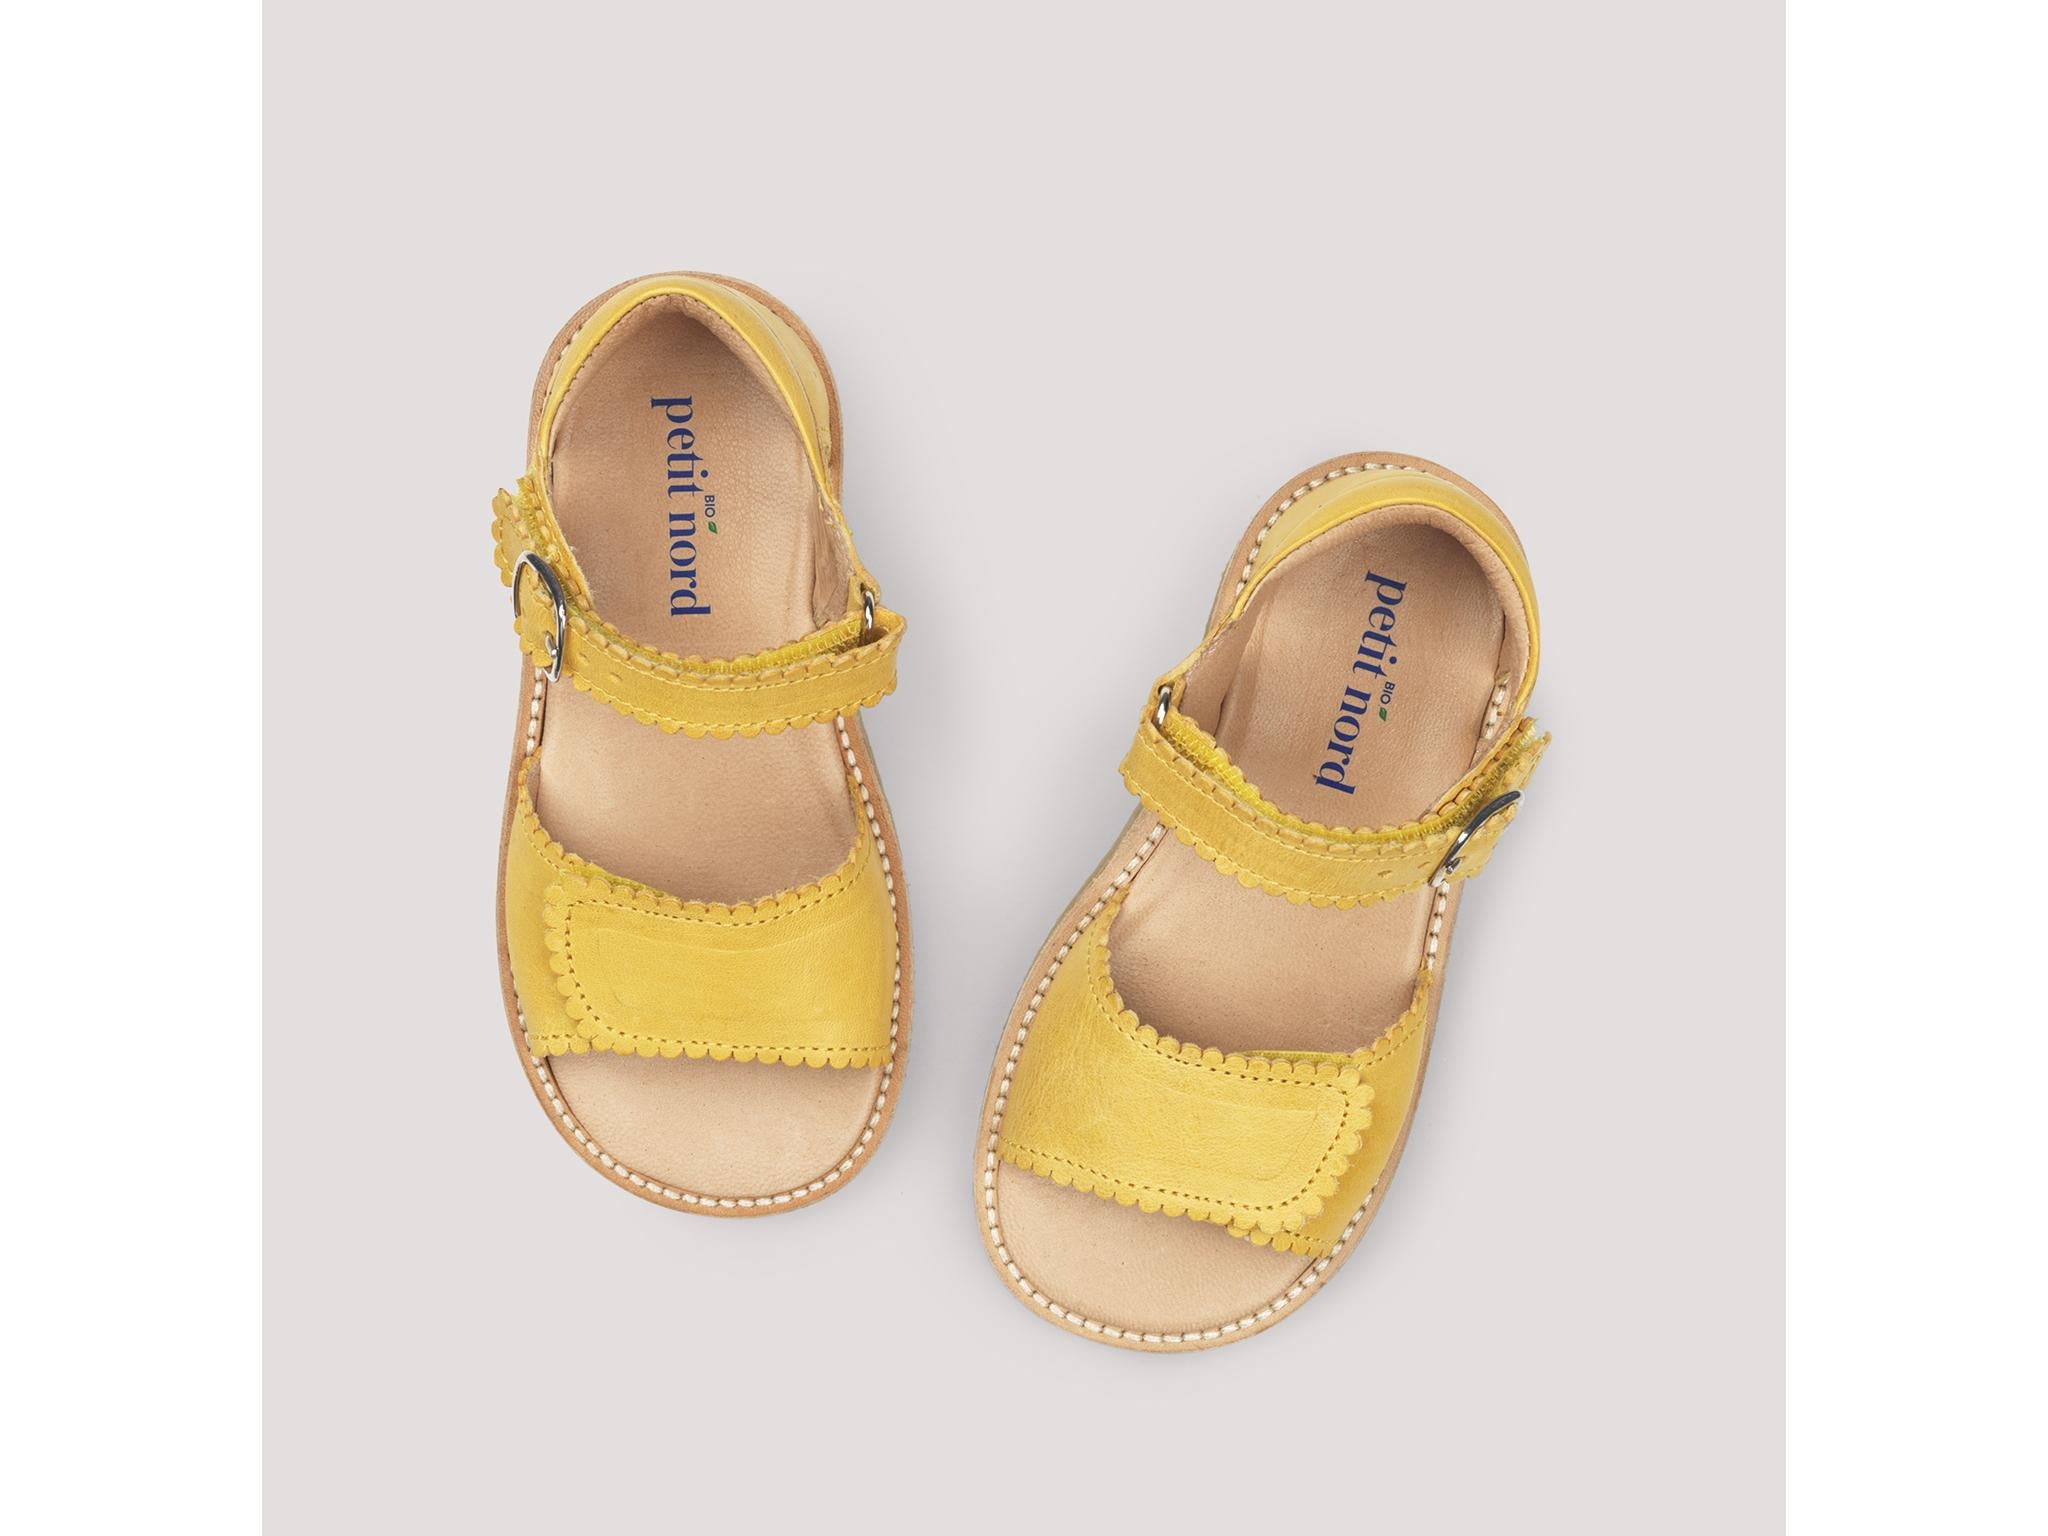 ethical kids shoes